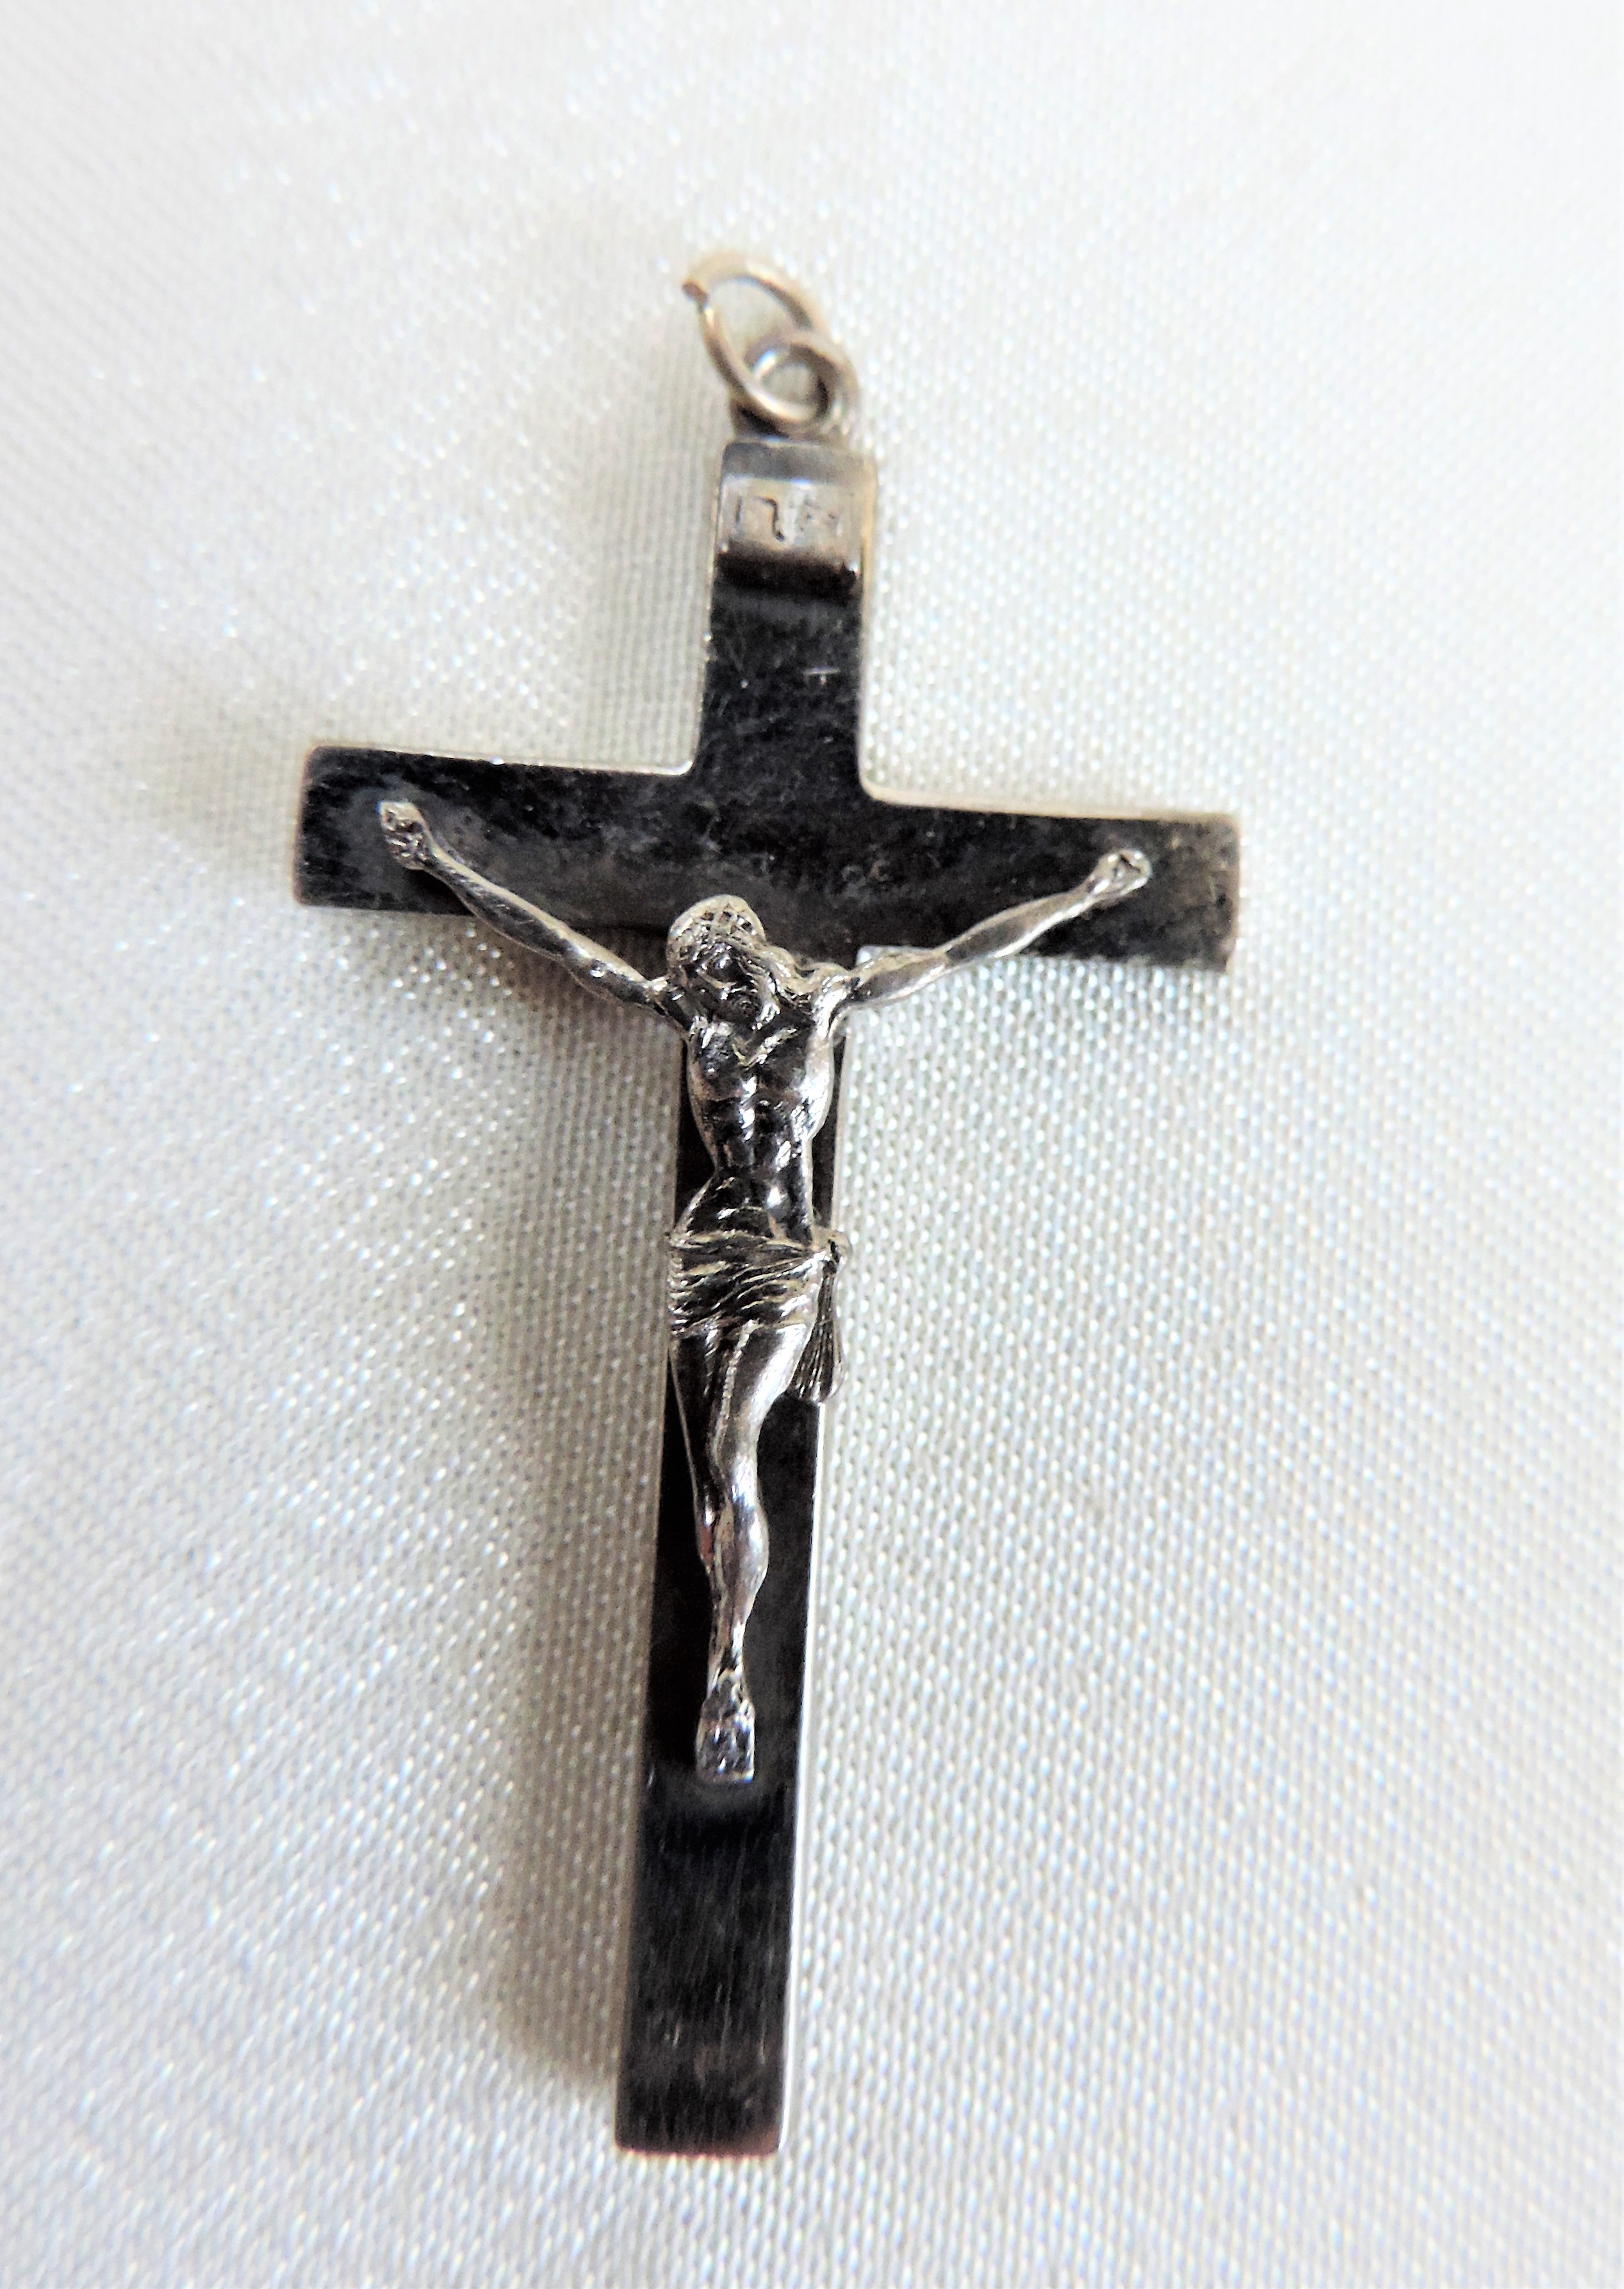 Vintage Silver Crucifix - Image 3 of 4